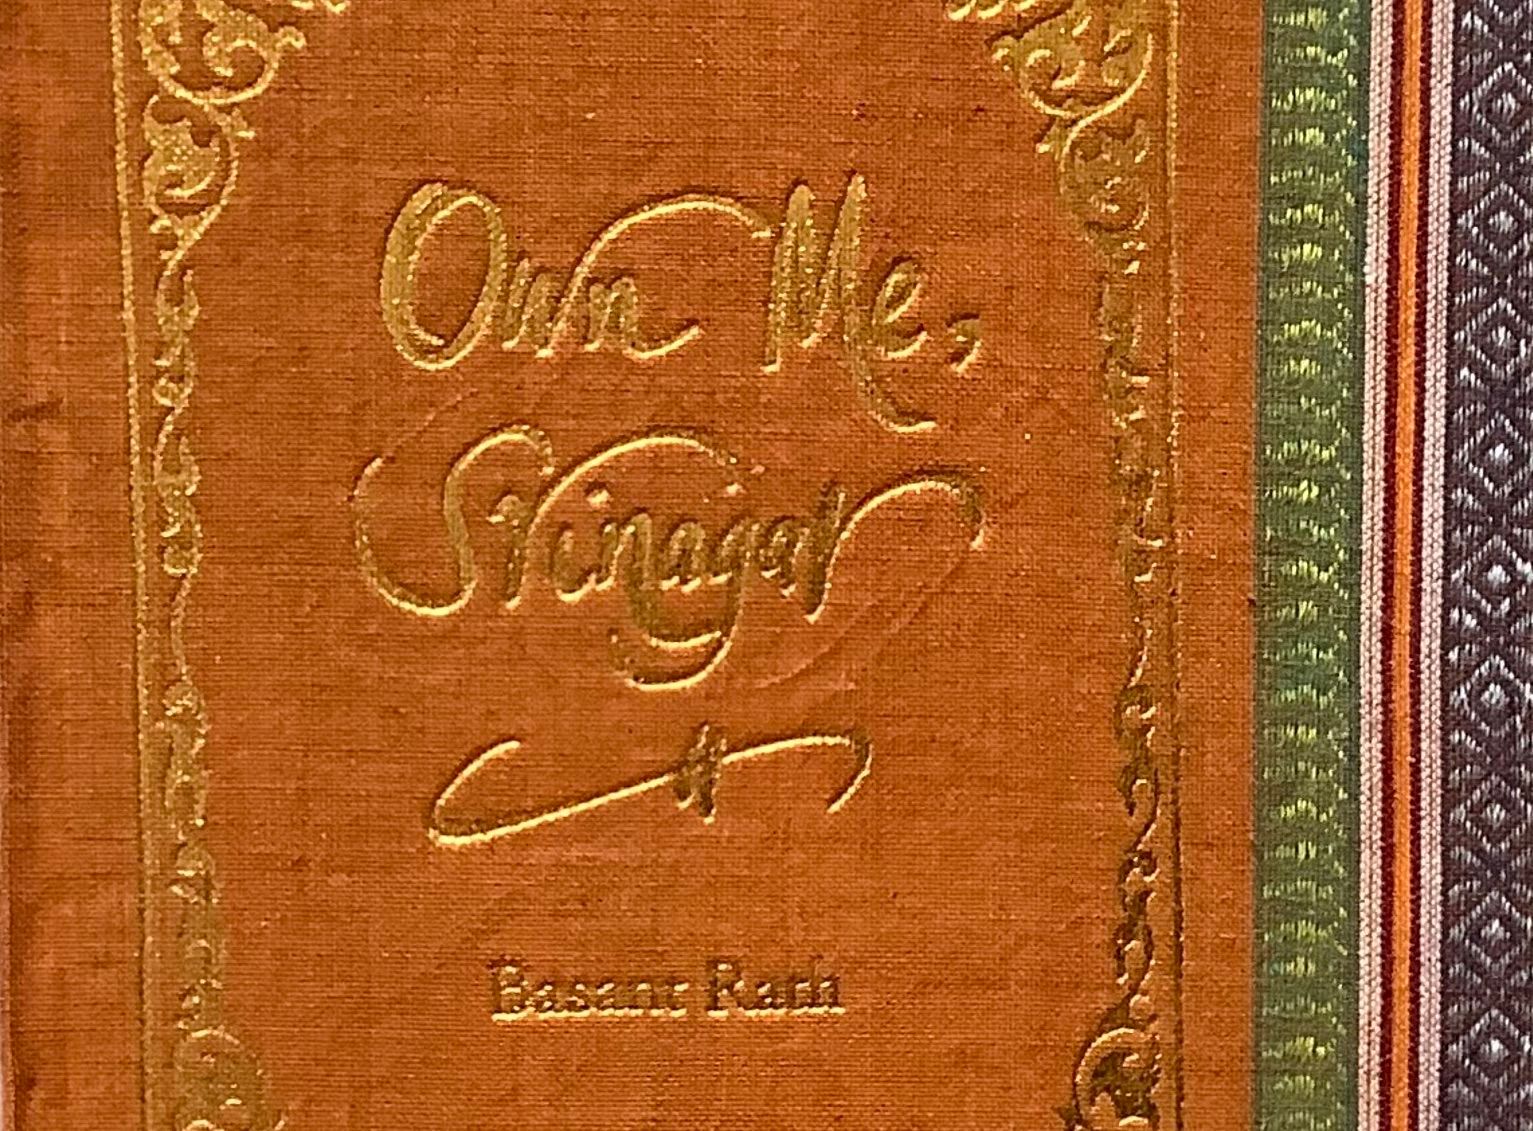 Another Look at India’s Books: Basant Rath’s “Own Me, Srinagar”